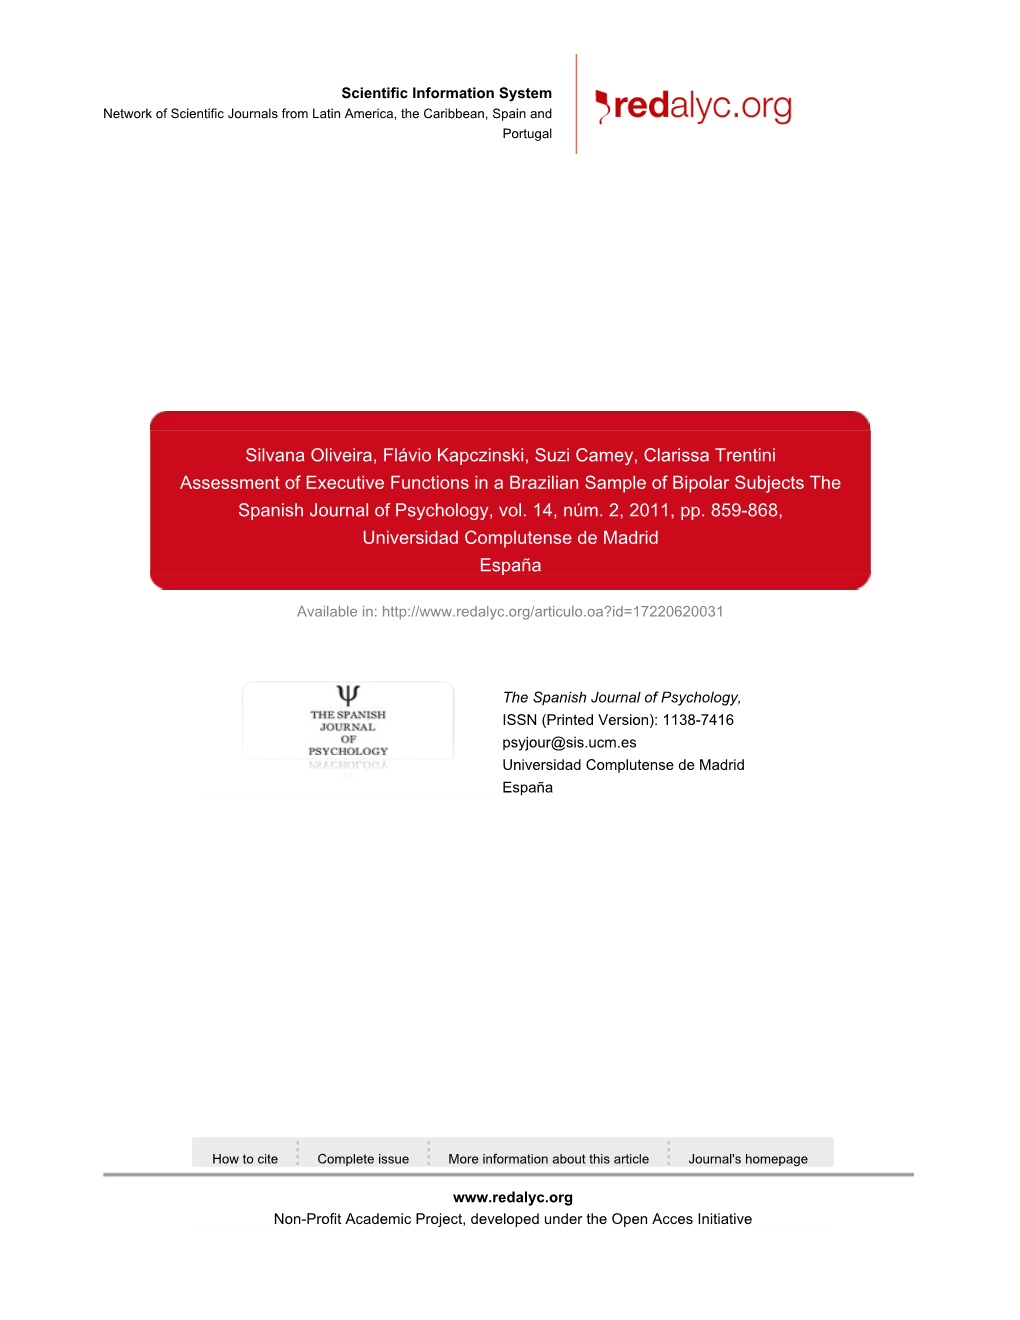 Redalyc. Assessment of Executive Functions in a Brazilian Sample Of